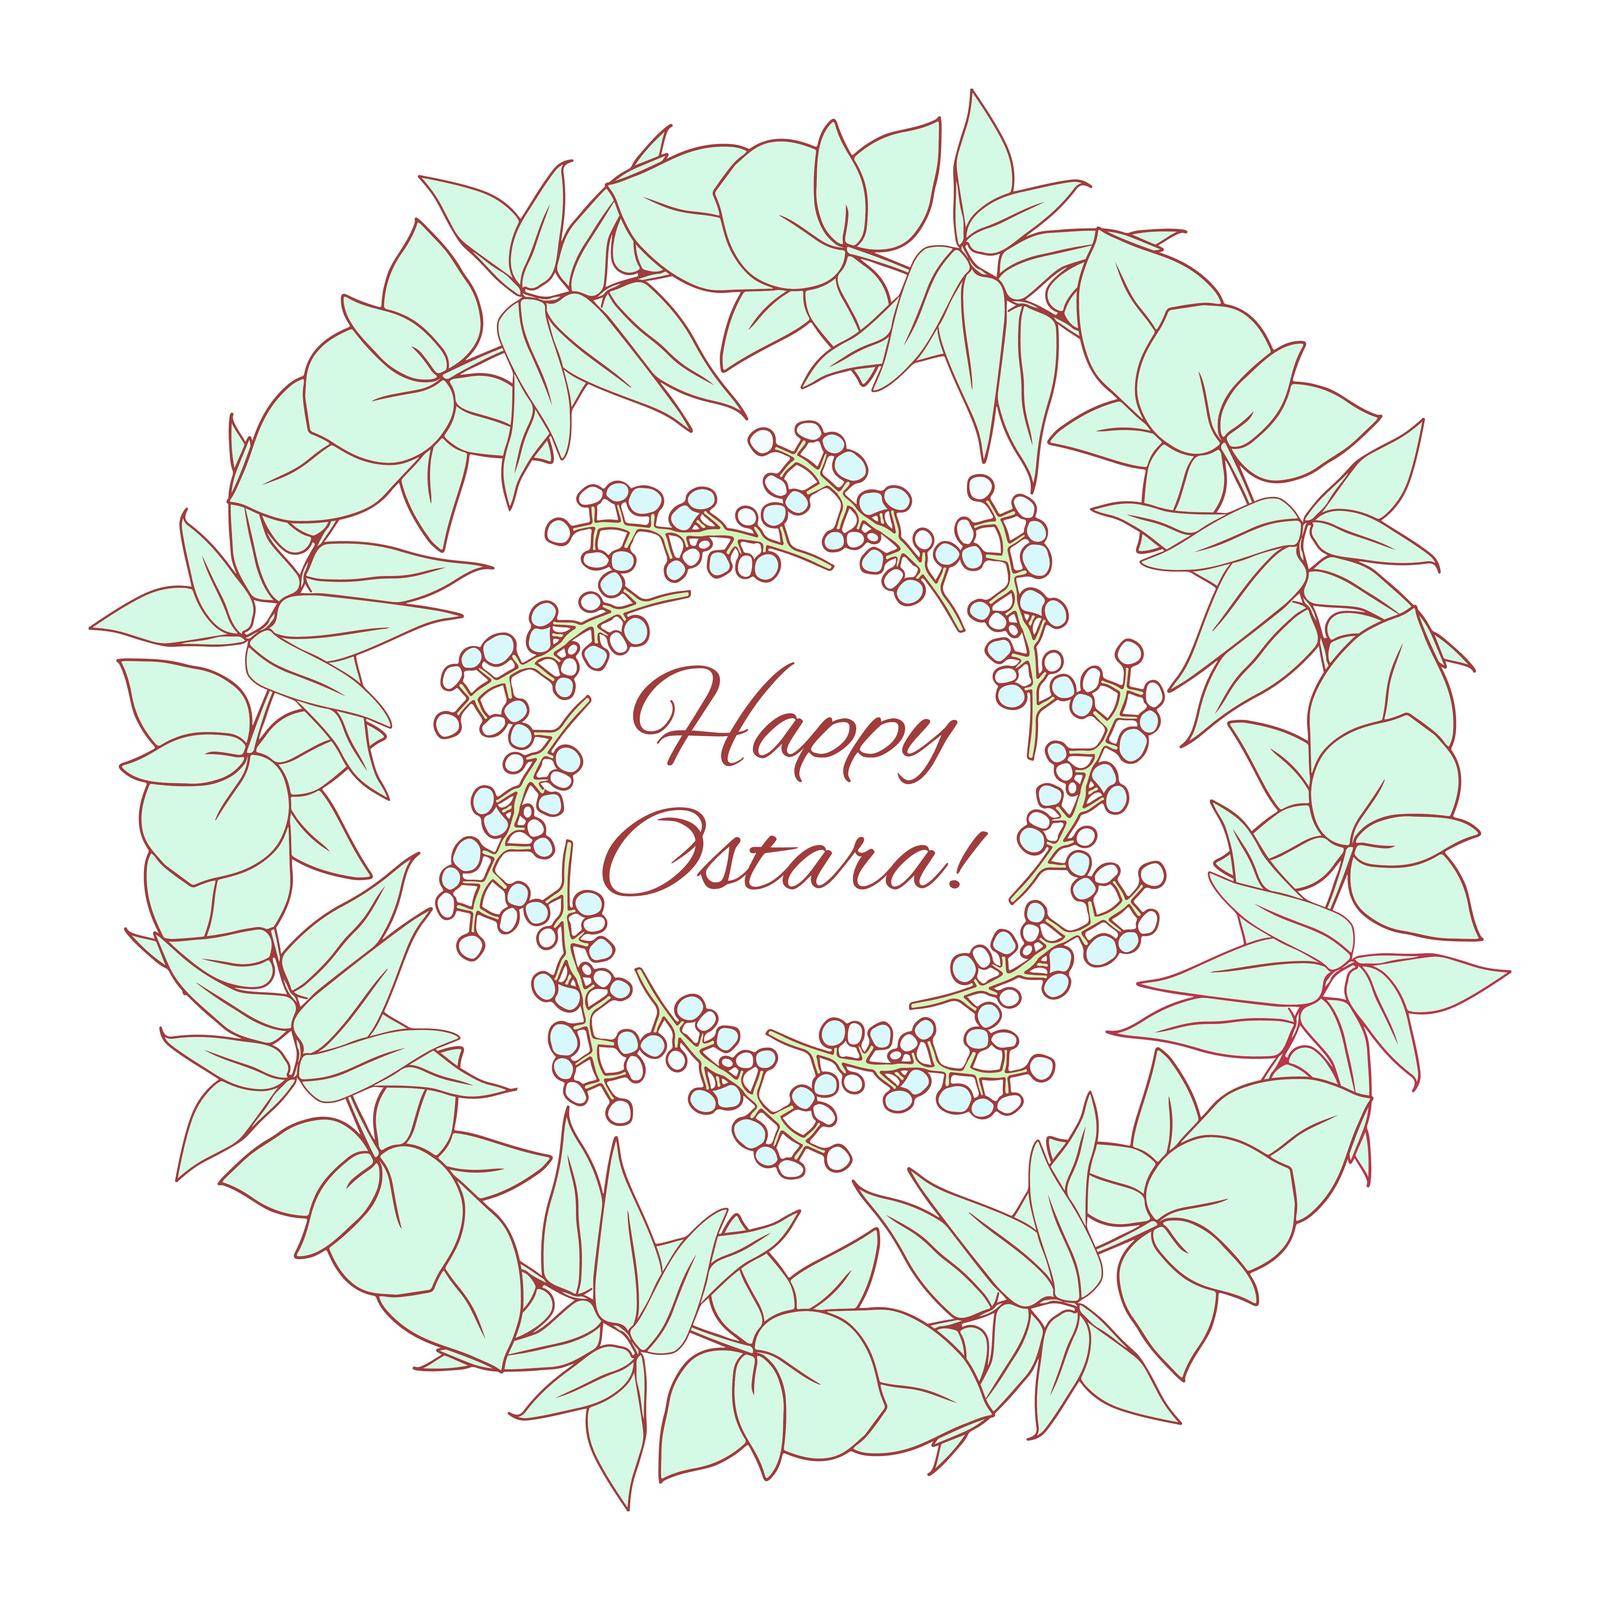 Pagan Festival Ostara greeting card. Vector frame design in pastel colors with lettering Blessed and happy Ostara. by Malianna